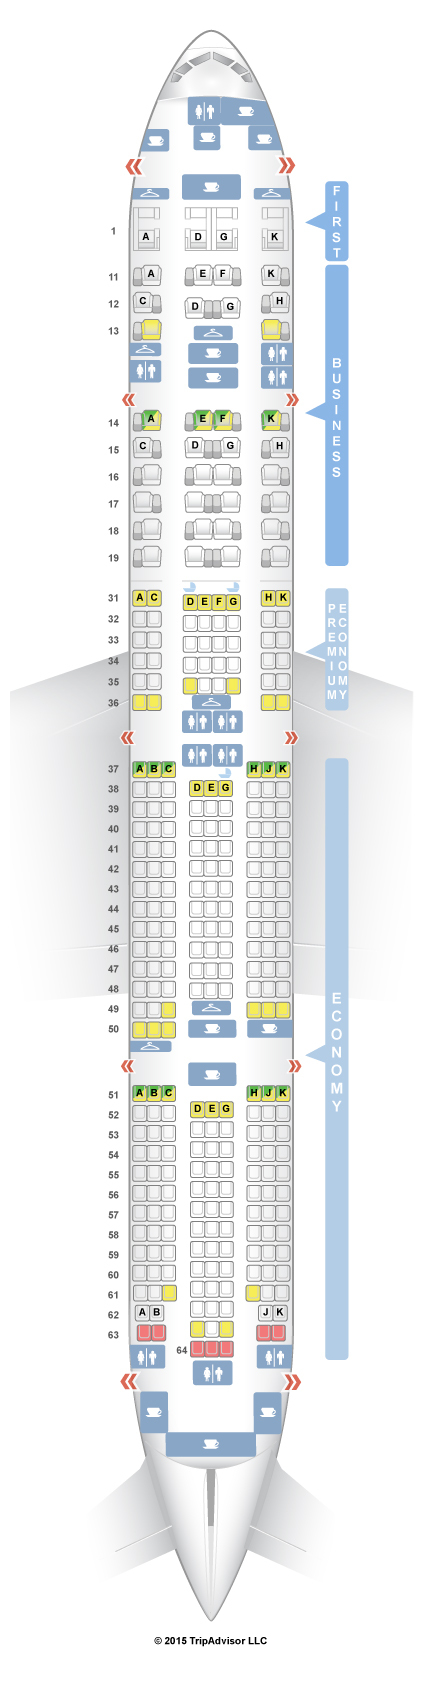 How do you find a seating chart for the Boeing 77W?